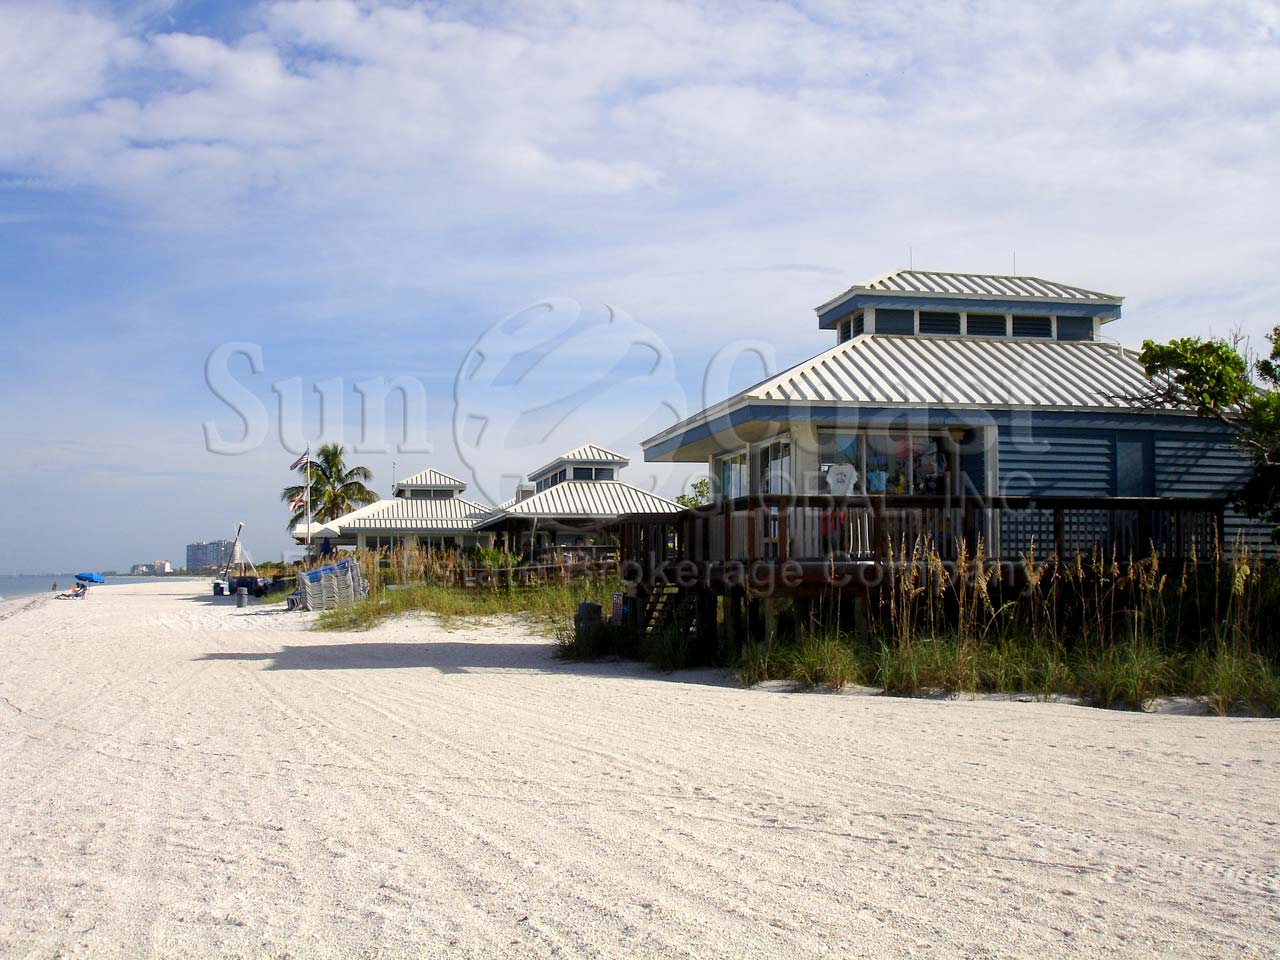 PELICAN BAY Sunset Cafe, Sand Bar and Beach Store on South Beach